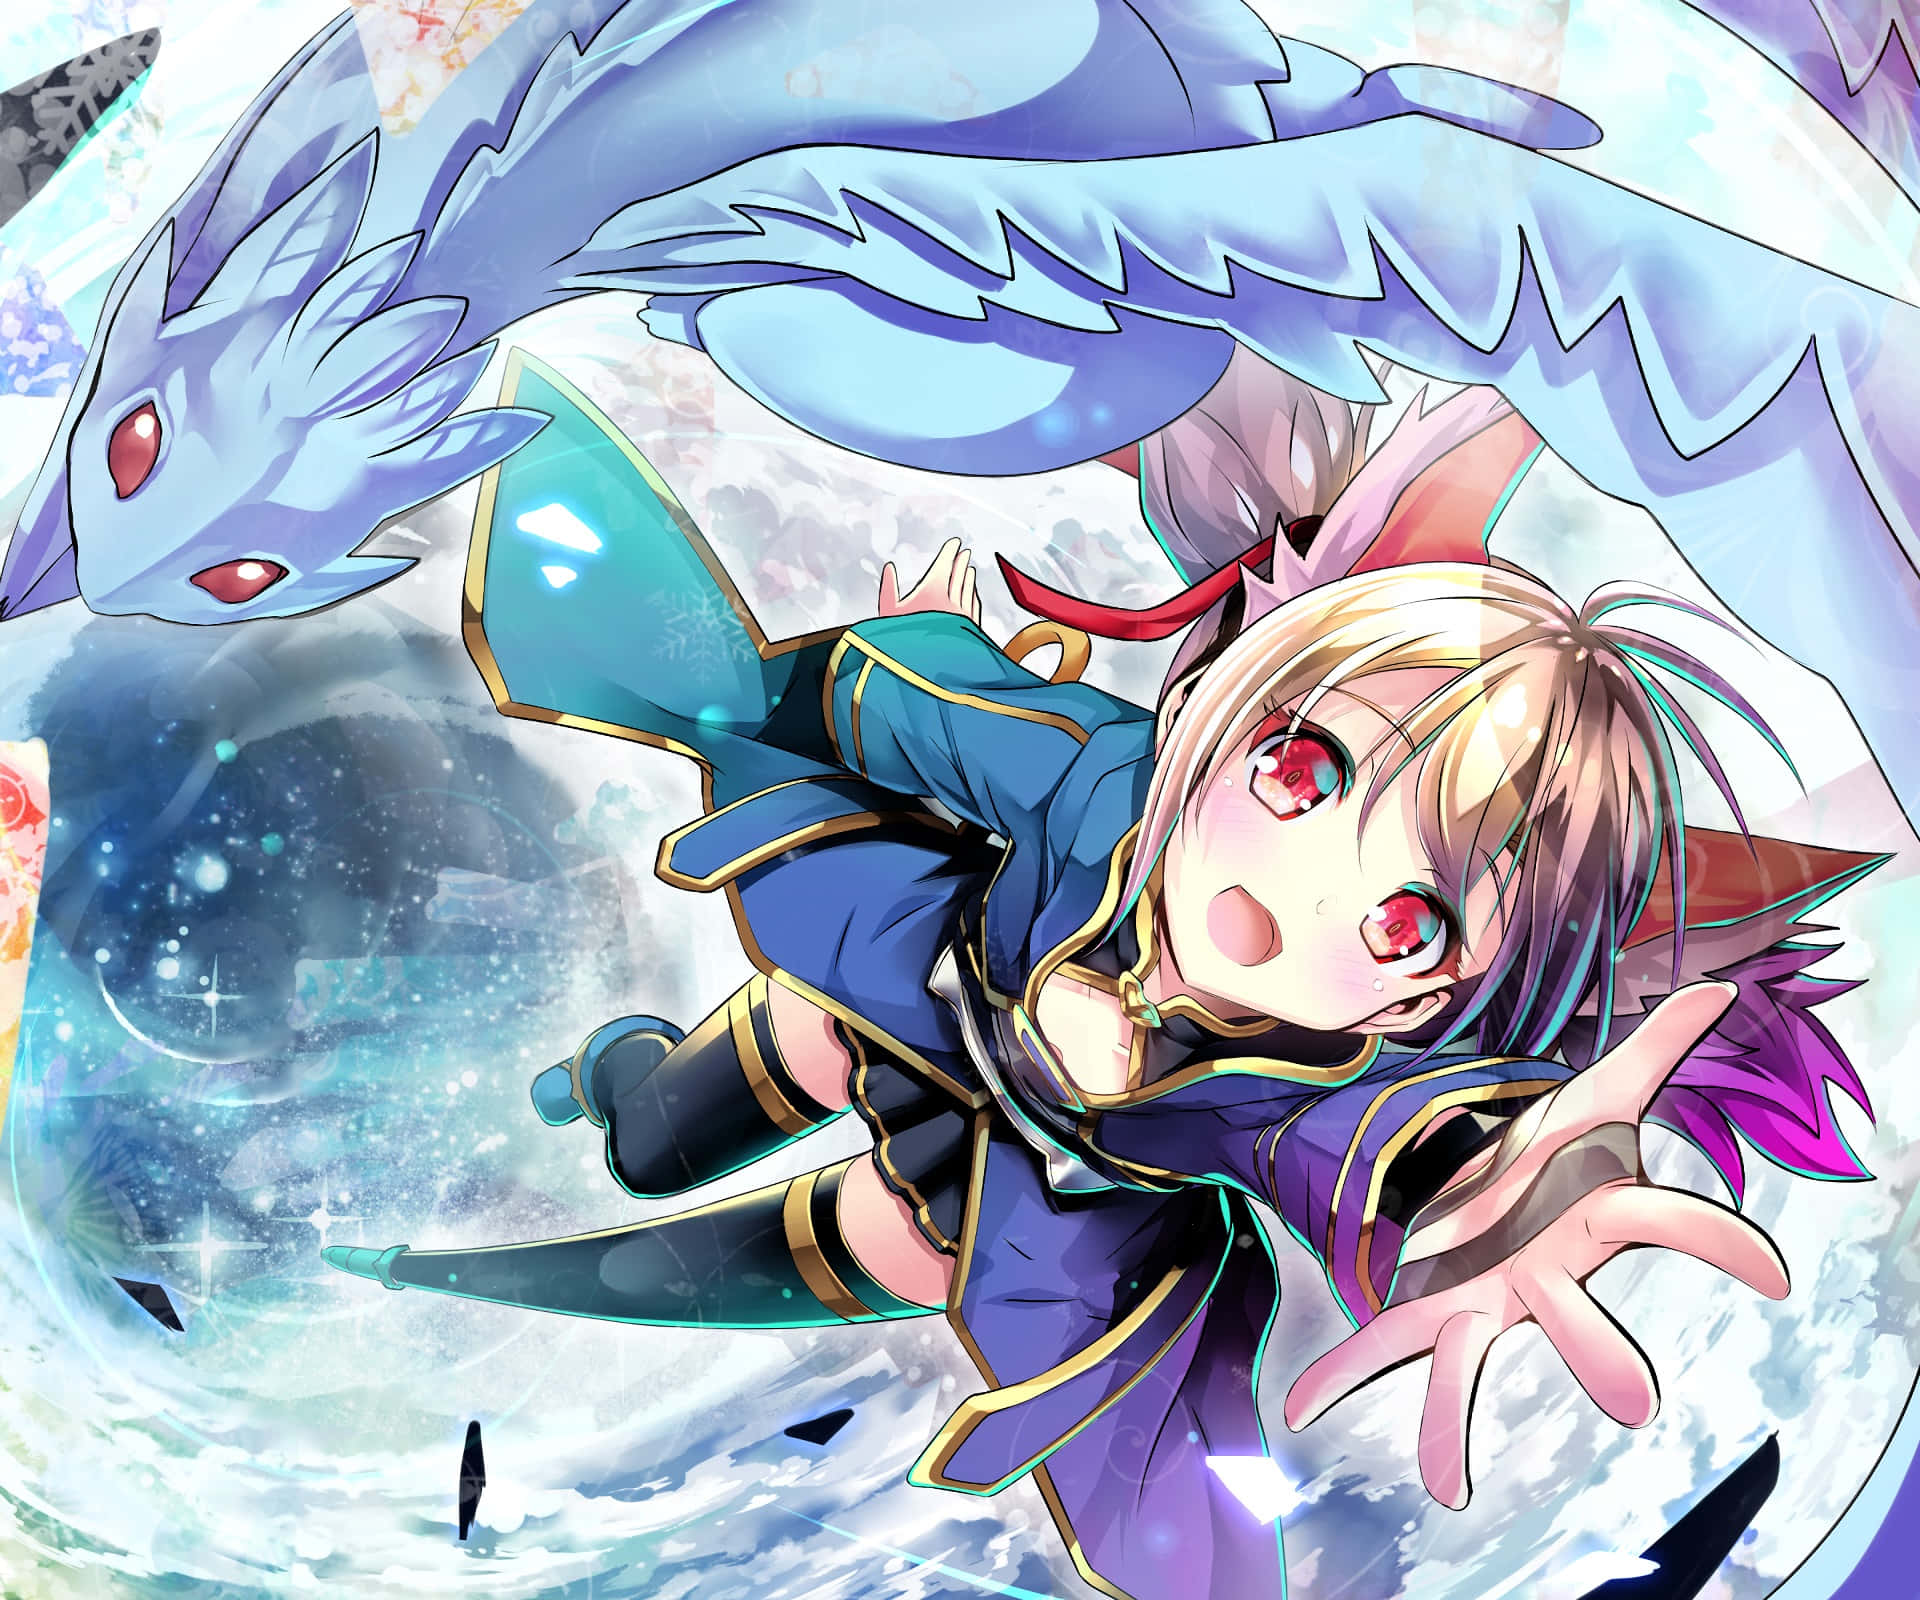 Sword Art Online: Silica in a Stunning Action Pose in a Magical Forest Wallpaper